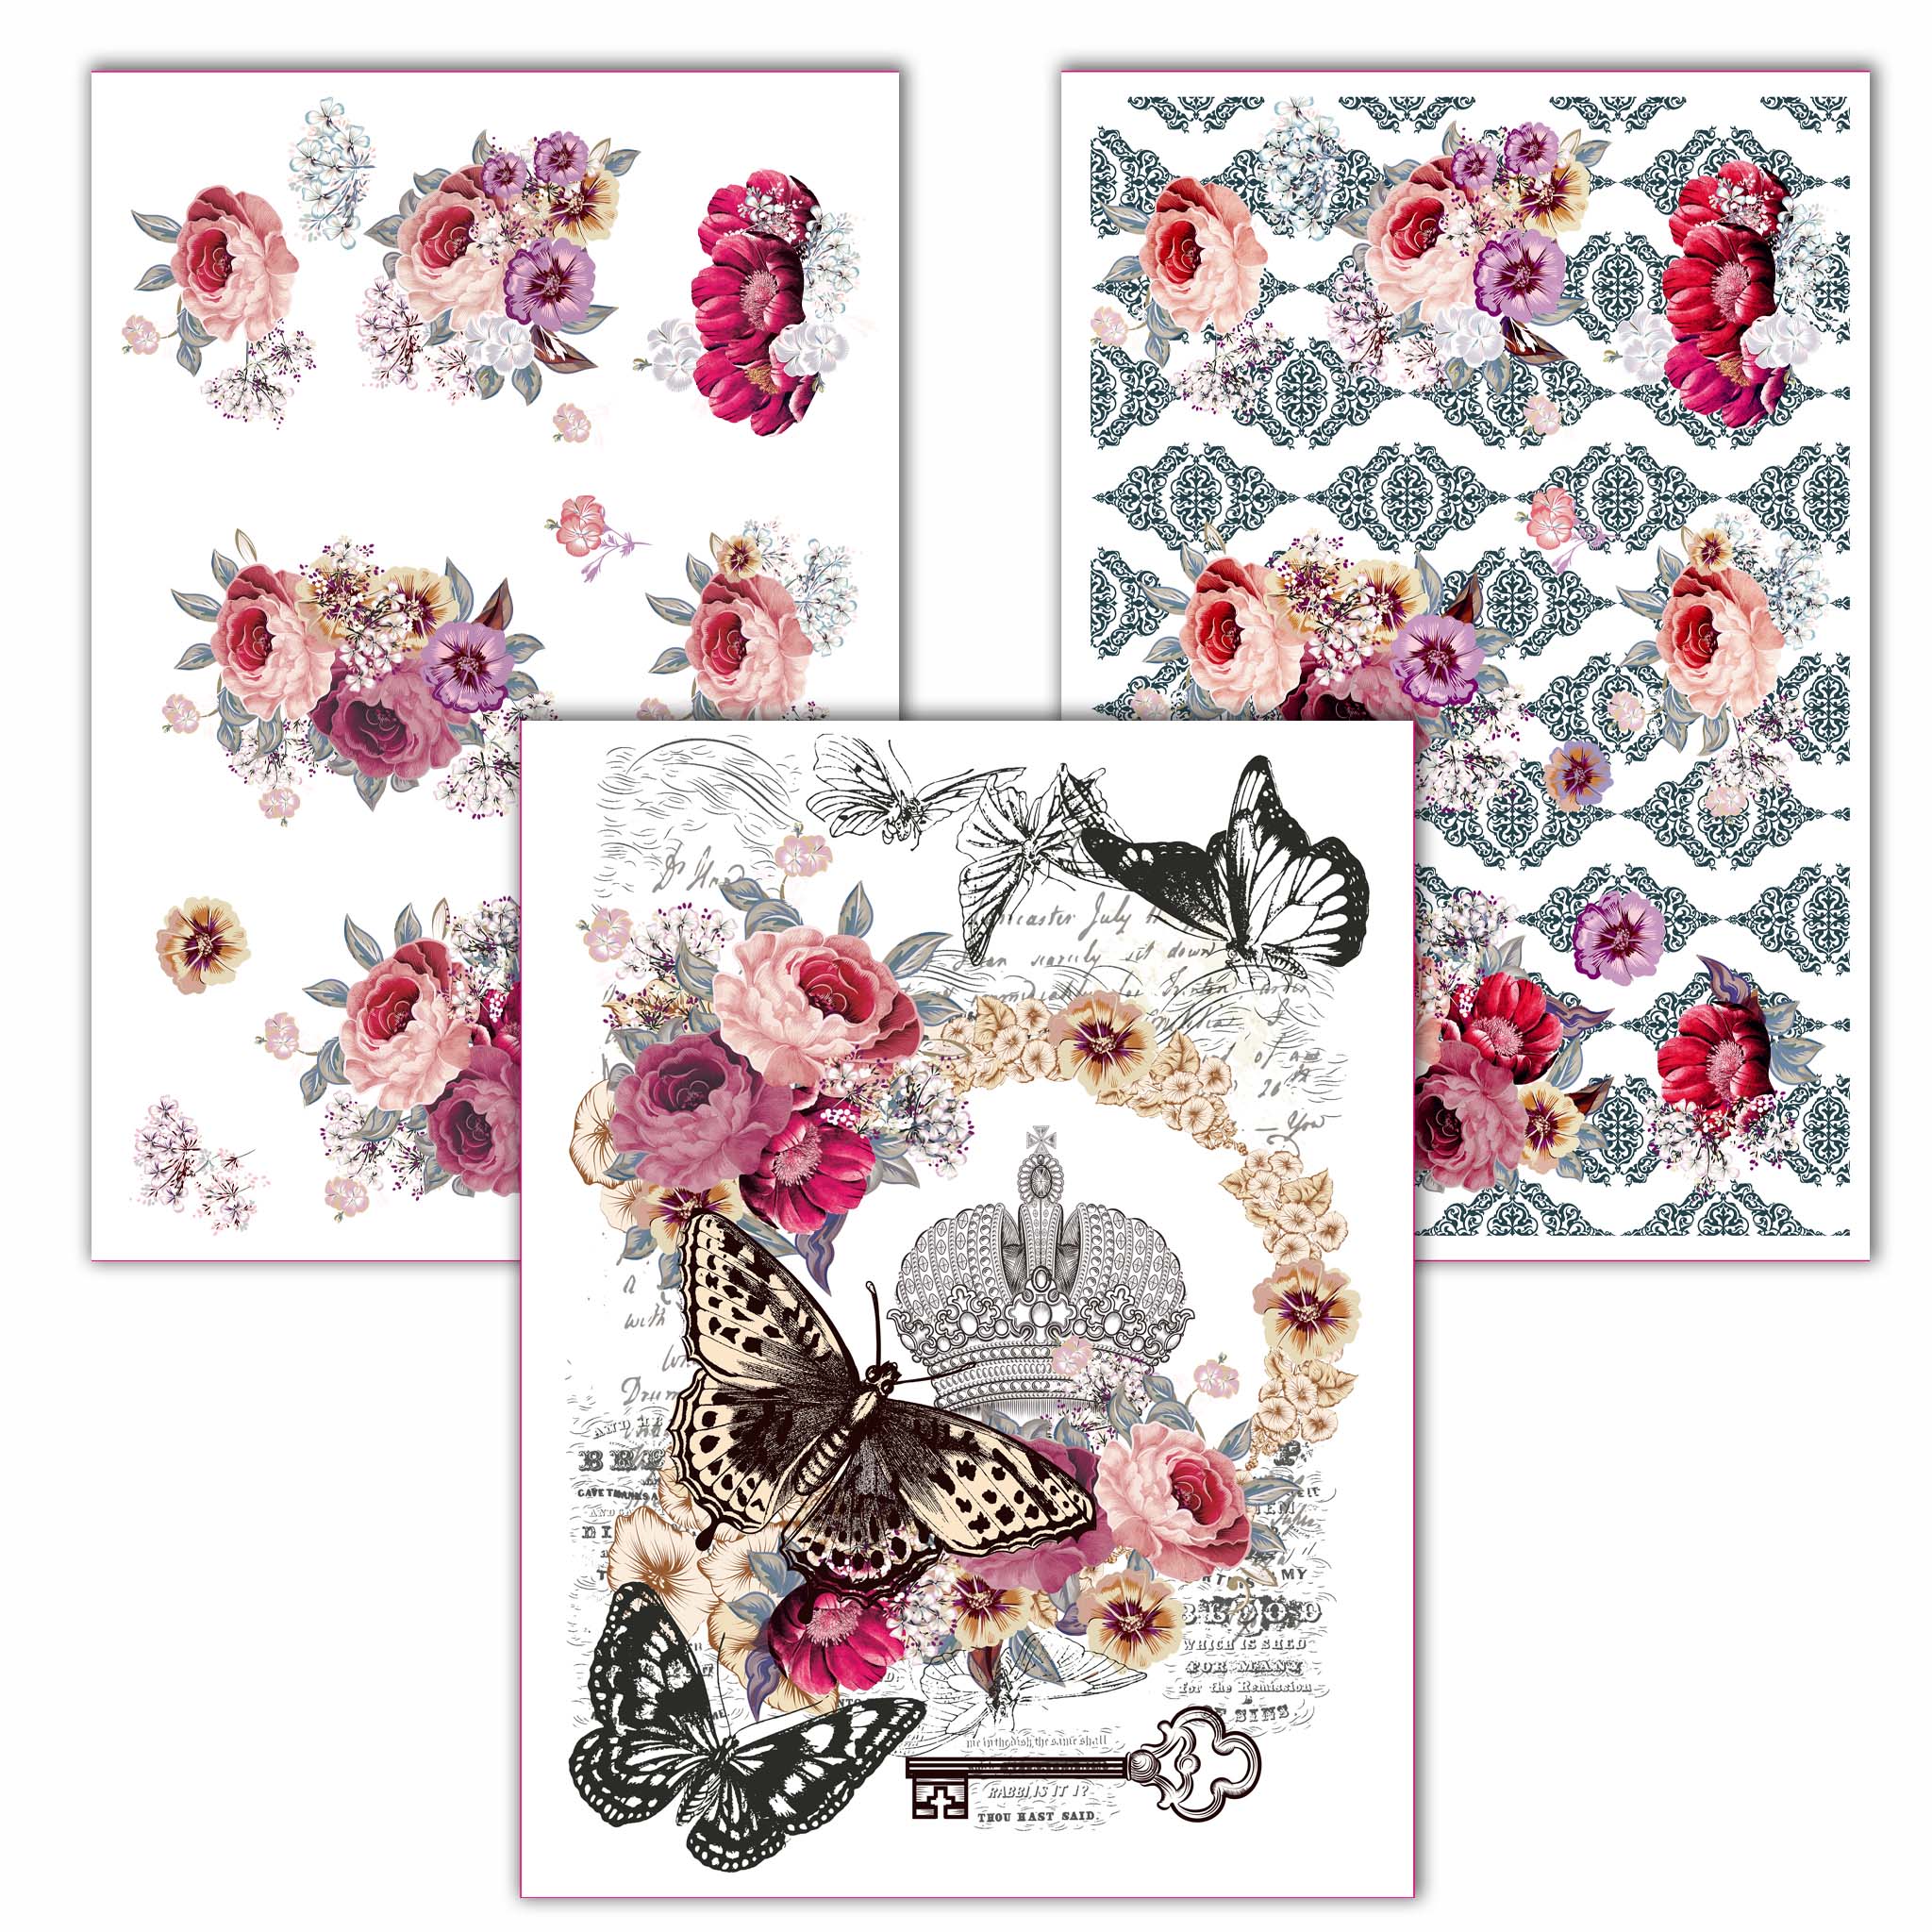 Three sheets of rub-on transfers that feature an ornate crown, romantic roses and fluttering butterflies; small bouquets of mauve and purple flowers; and a repeating black damask pattern with small bouquets of mauve and purple flowers.